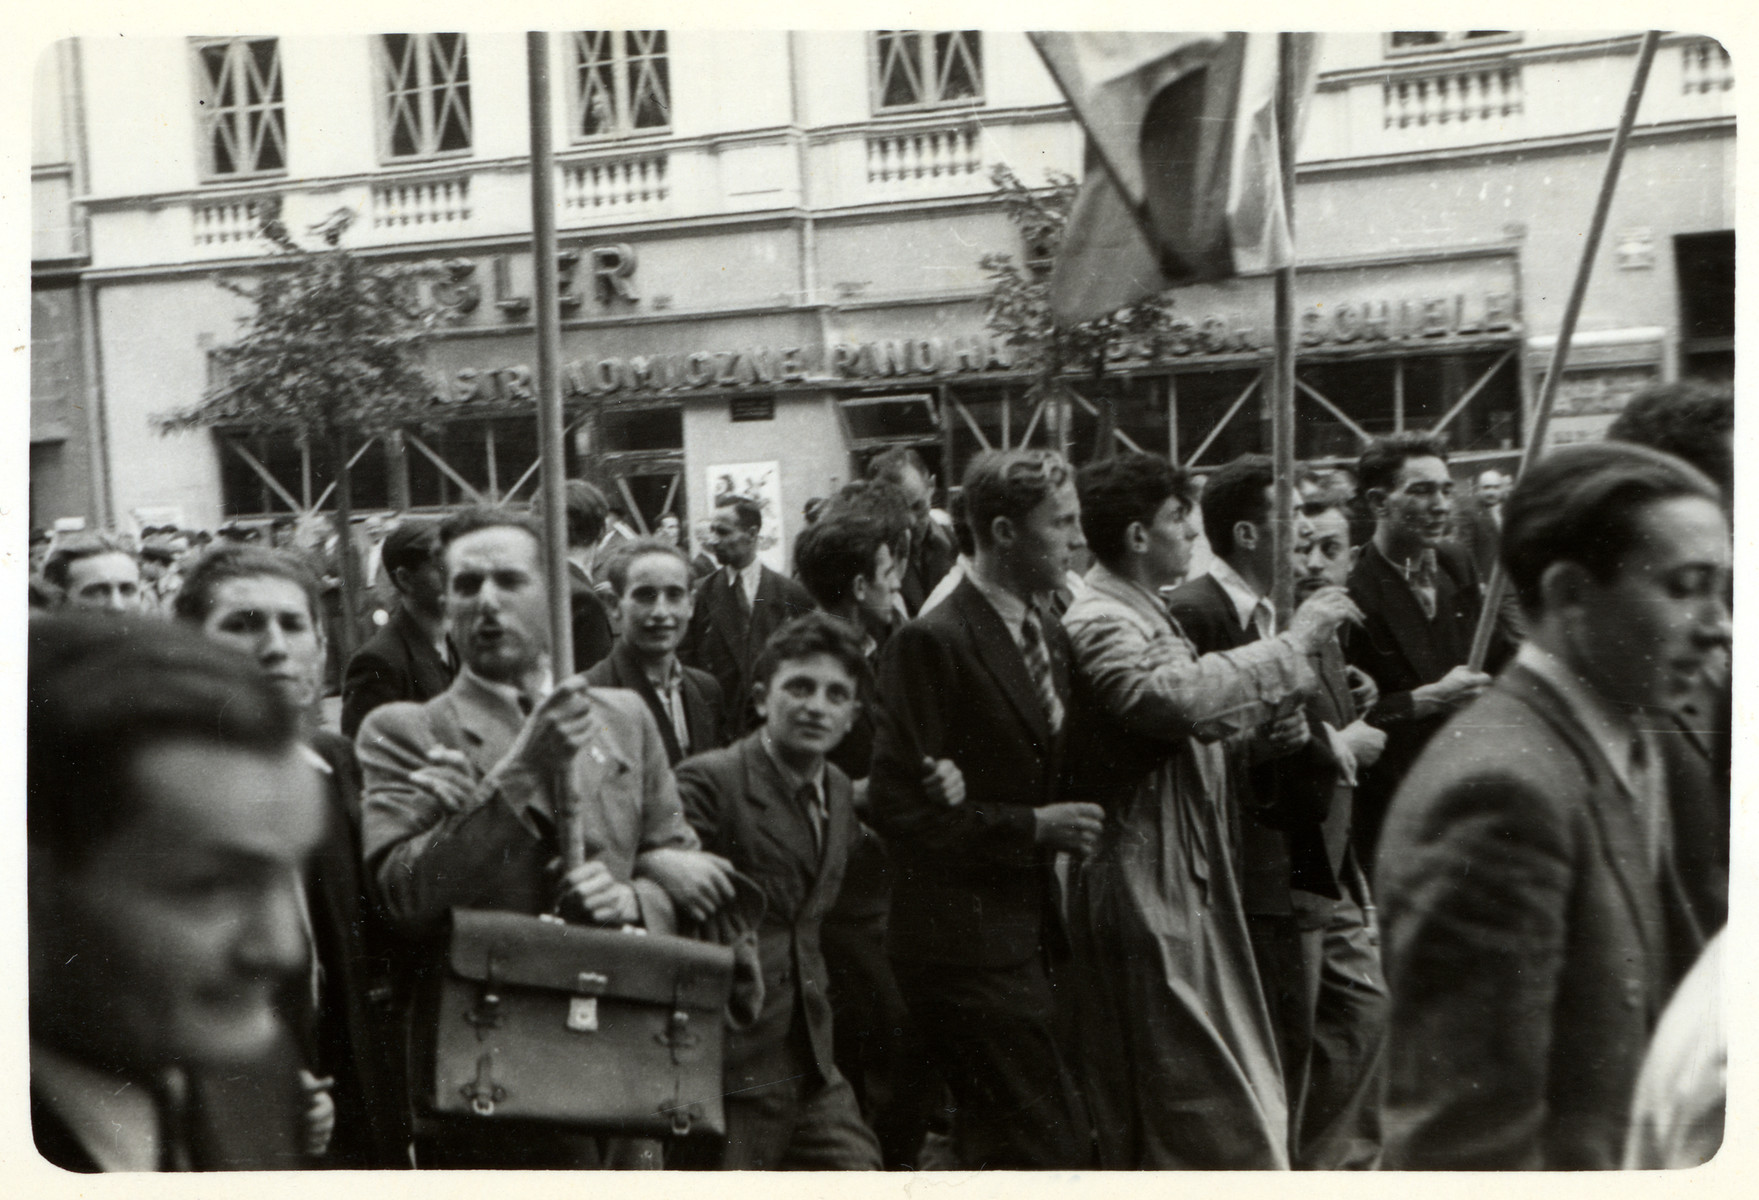 "A Moment of Confidence:" Poles celebrate in the streets at the news that England and France declared war on Germany. 

[The book "Warsaw" by Julien Bryan states that this photograph was taken on September 3, 1939 but Mr. Bryan himself did not arrive in Warsaw until the 7th of that month. This information does not match up, thus the tentative date.]